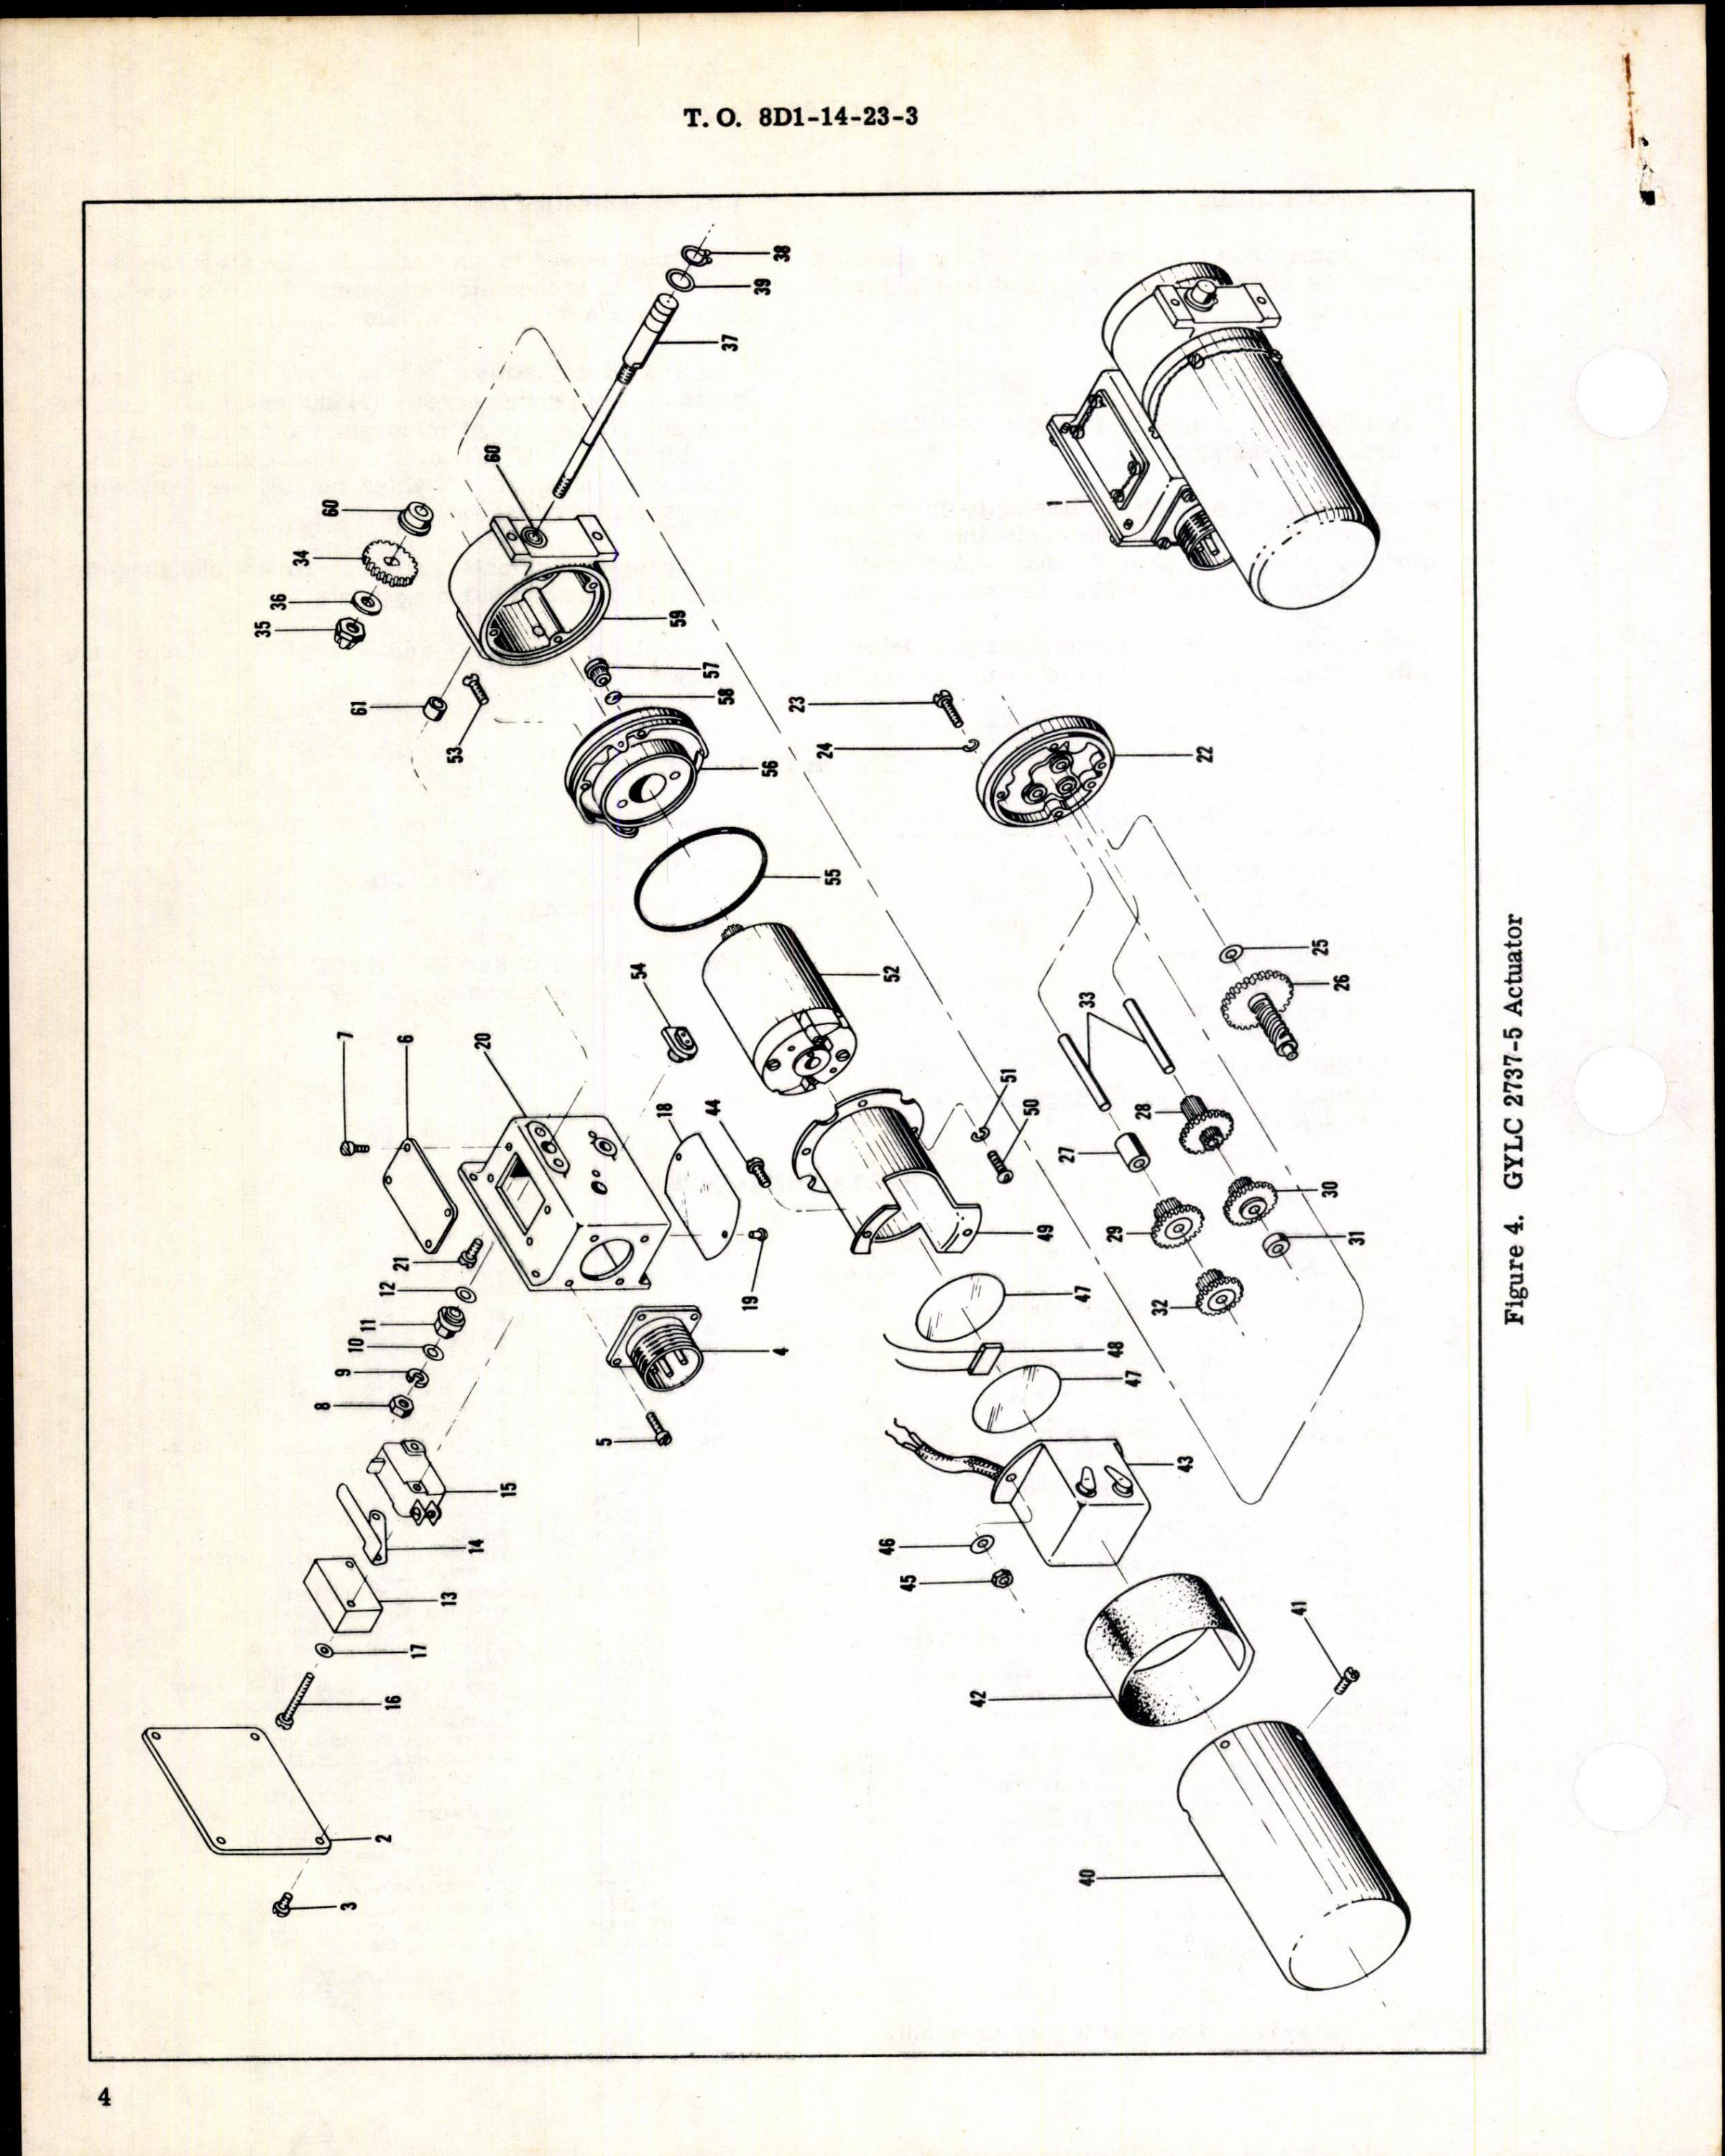 Sample page 4 from AirCorps Library document: Instructions w Parts Breakdown for Actuator, Undirectional